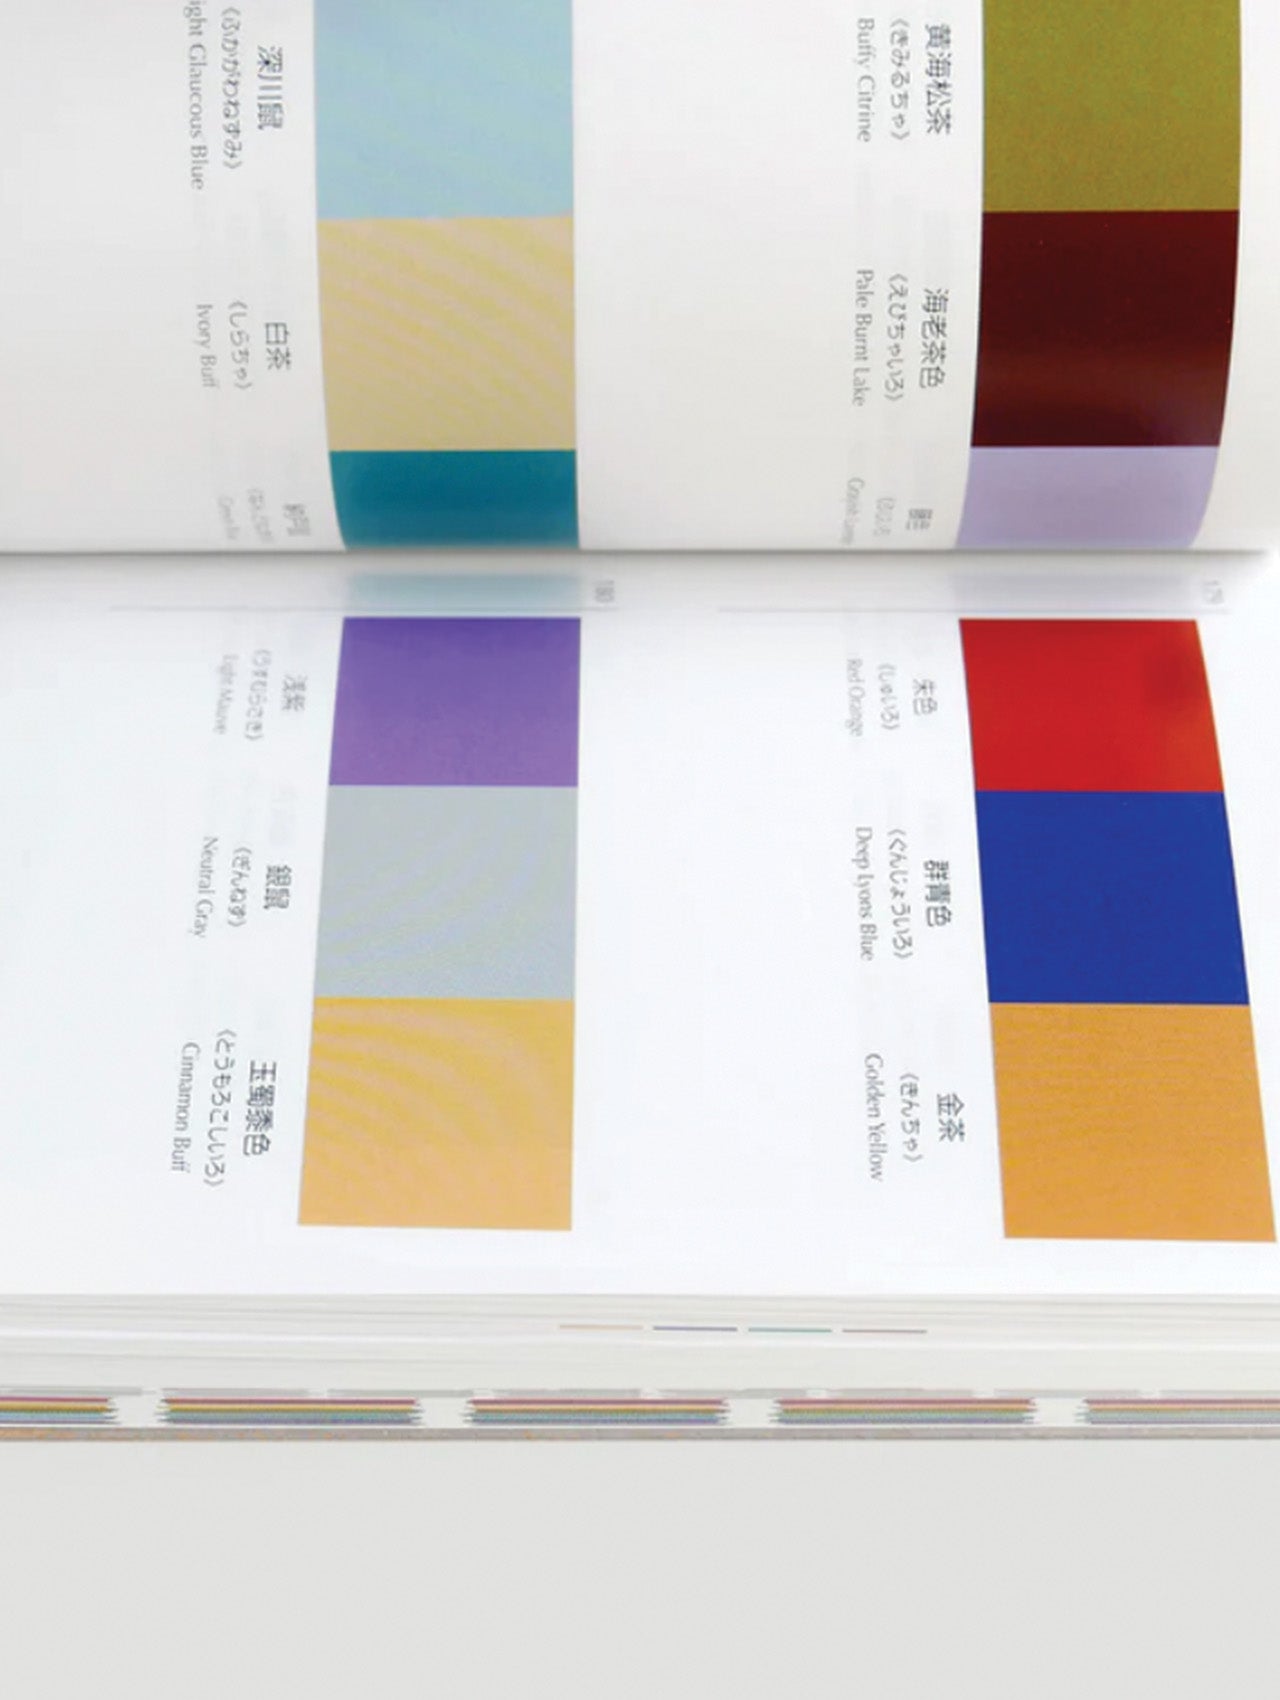 A Dictionary Of Color Combinations - Sanzo Wada